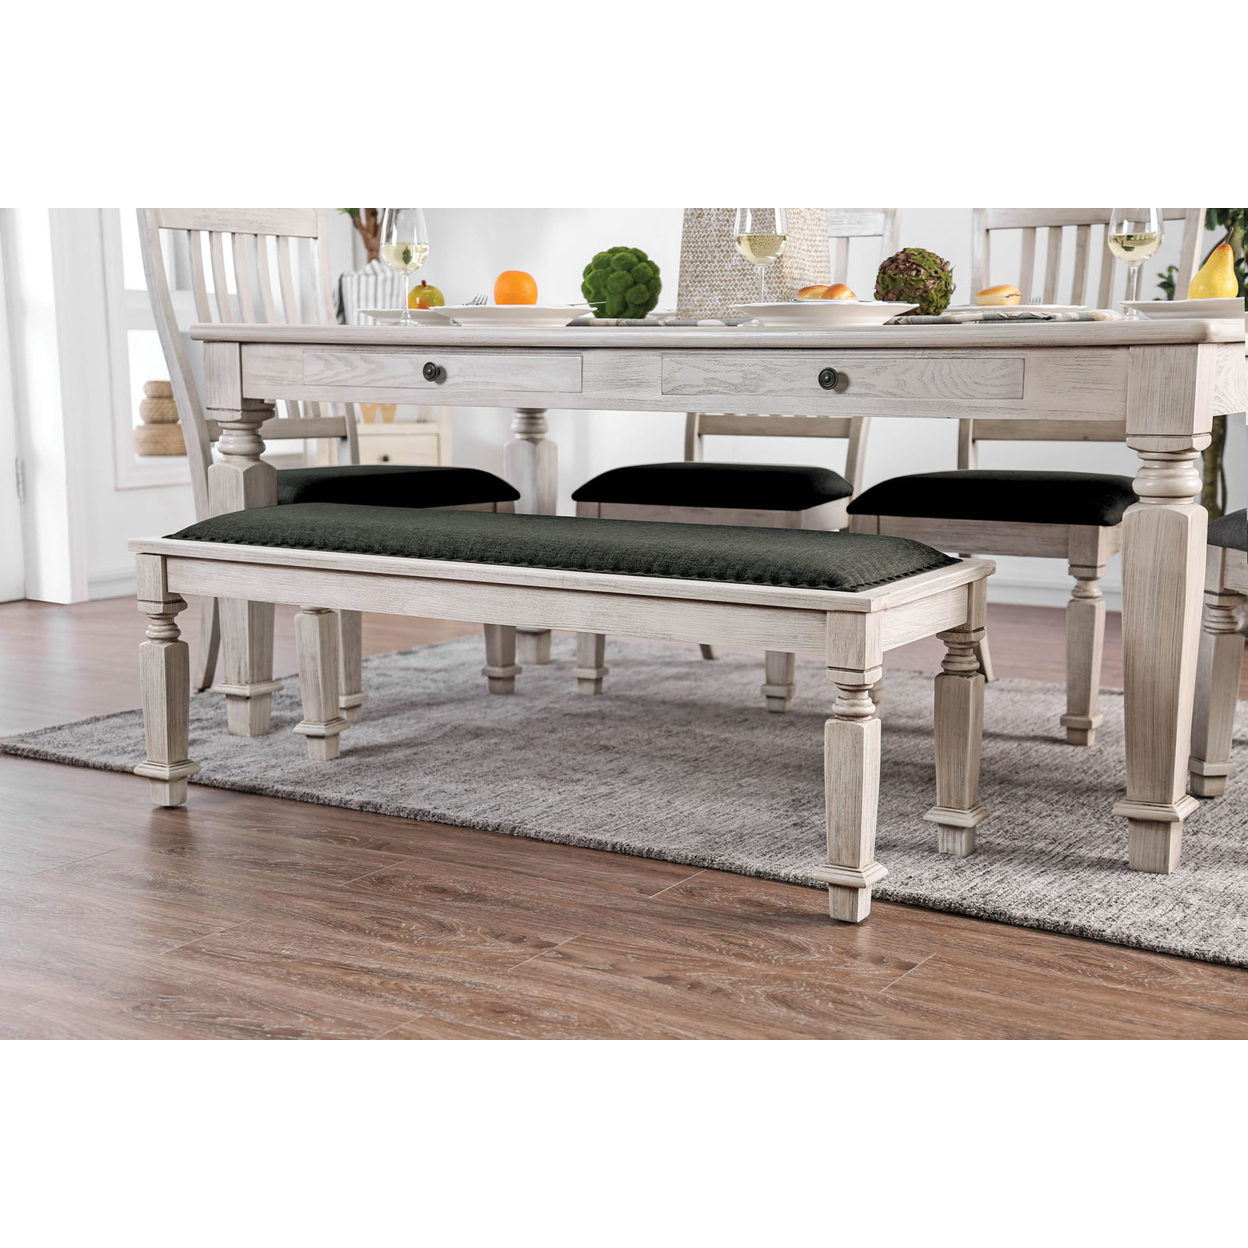 Transitional Style Fabric Upholstered Wooden Bench, White And Gray- Saltoro Sherpi